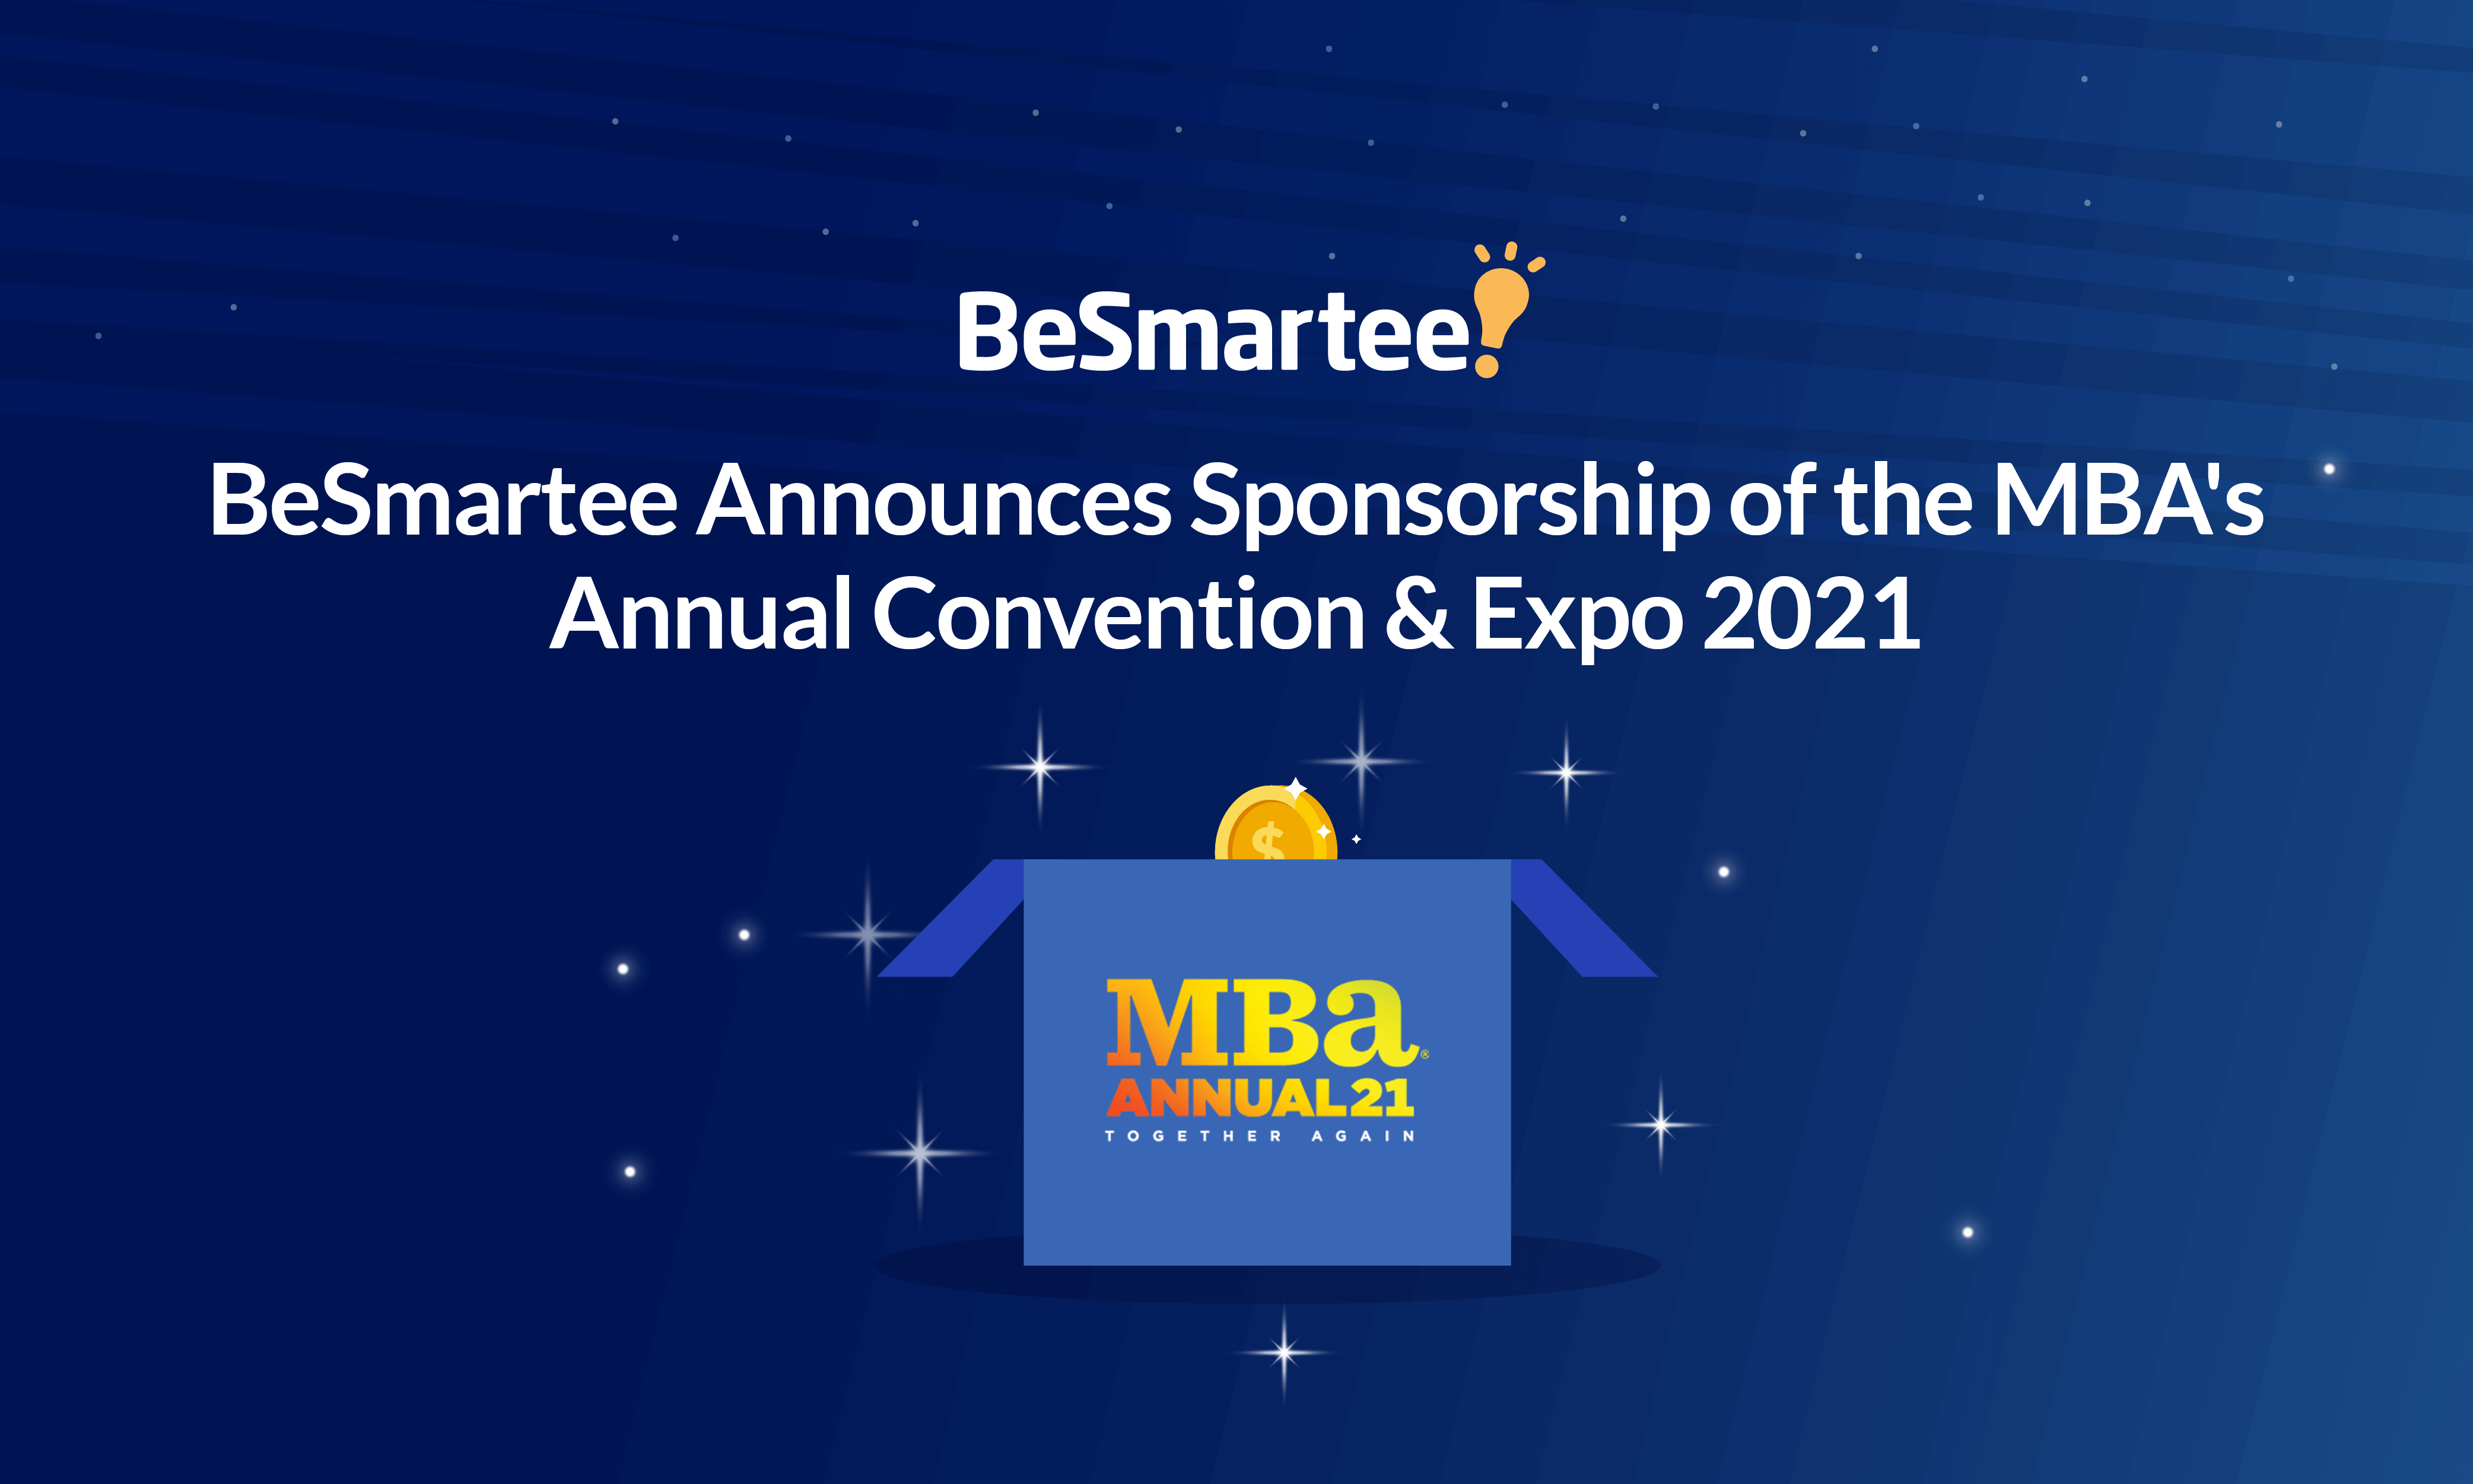 besmartee mba annual convention and expo 2021